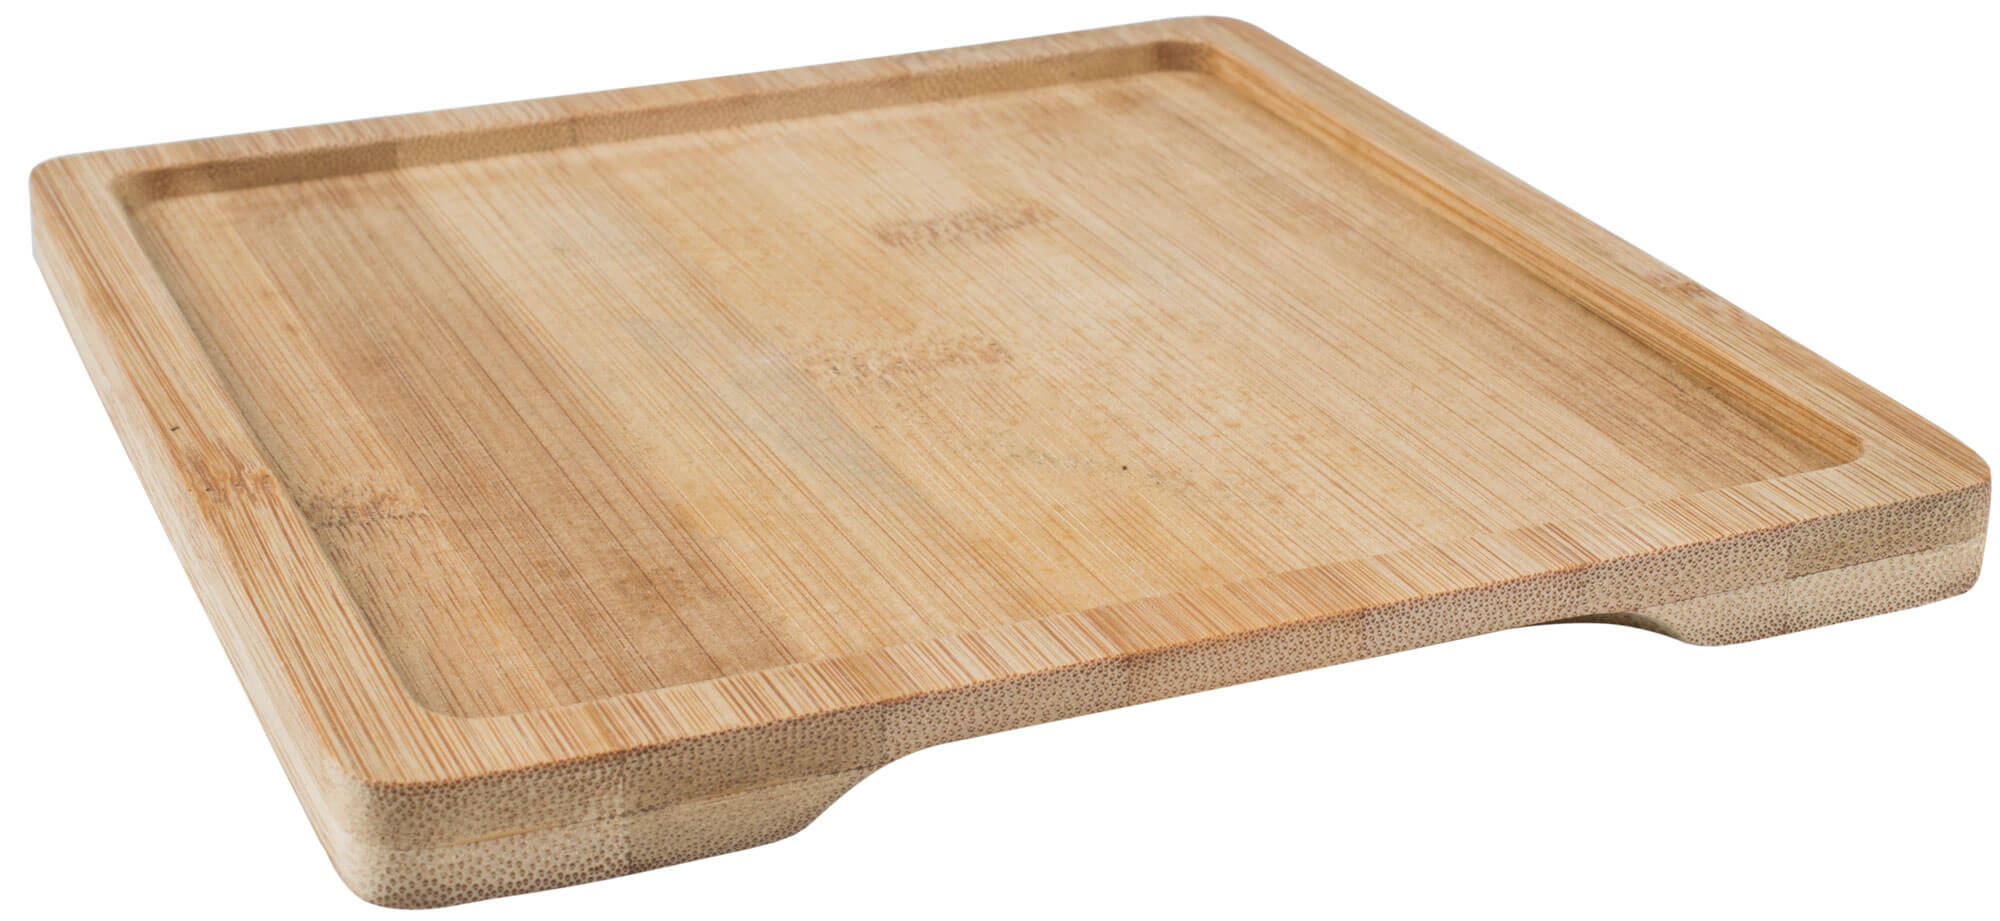 Serving tray bamboo - 17,5x16cm